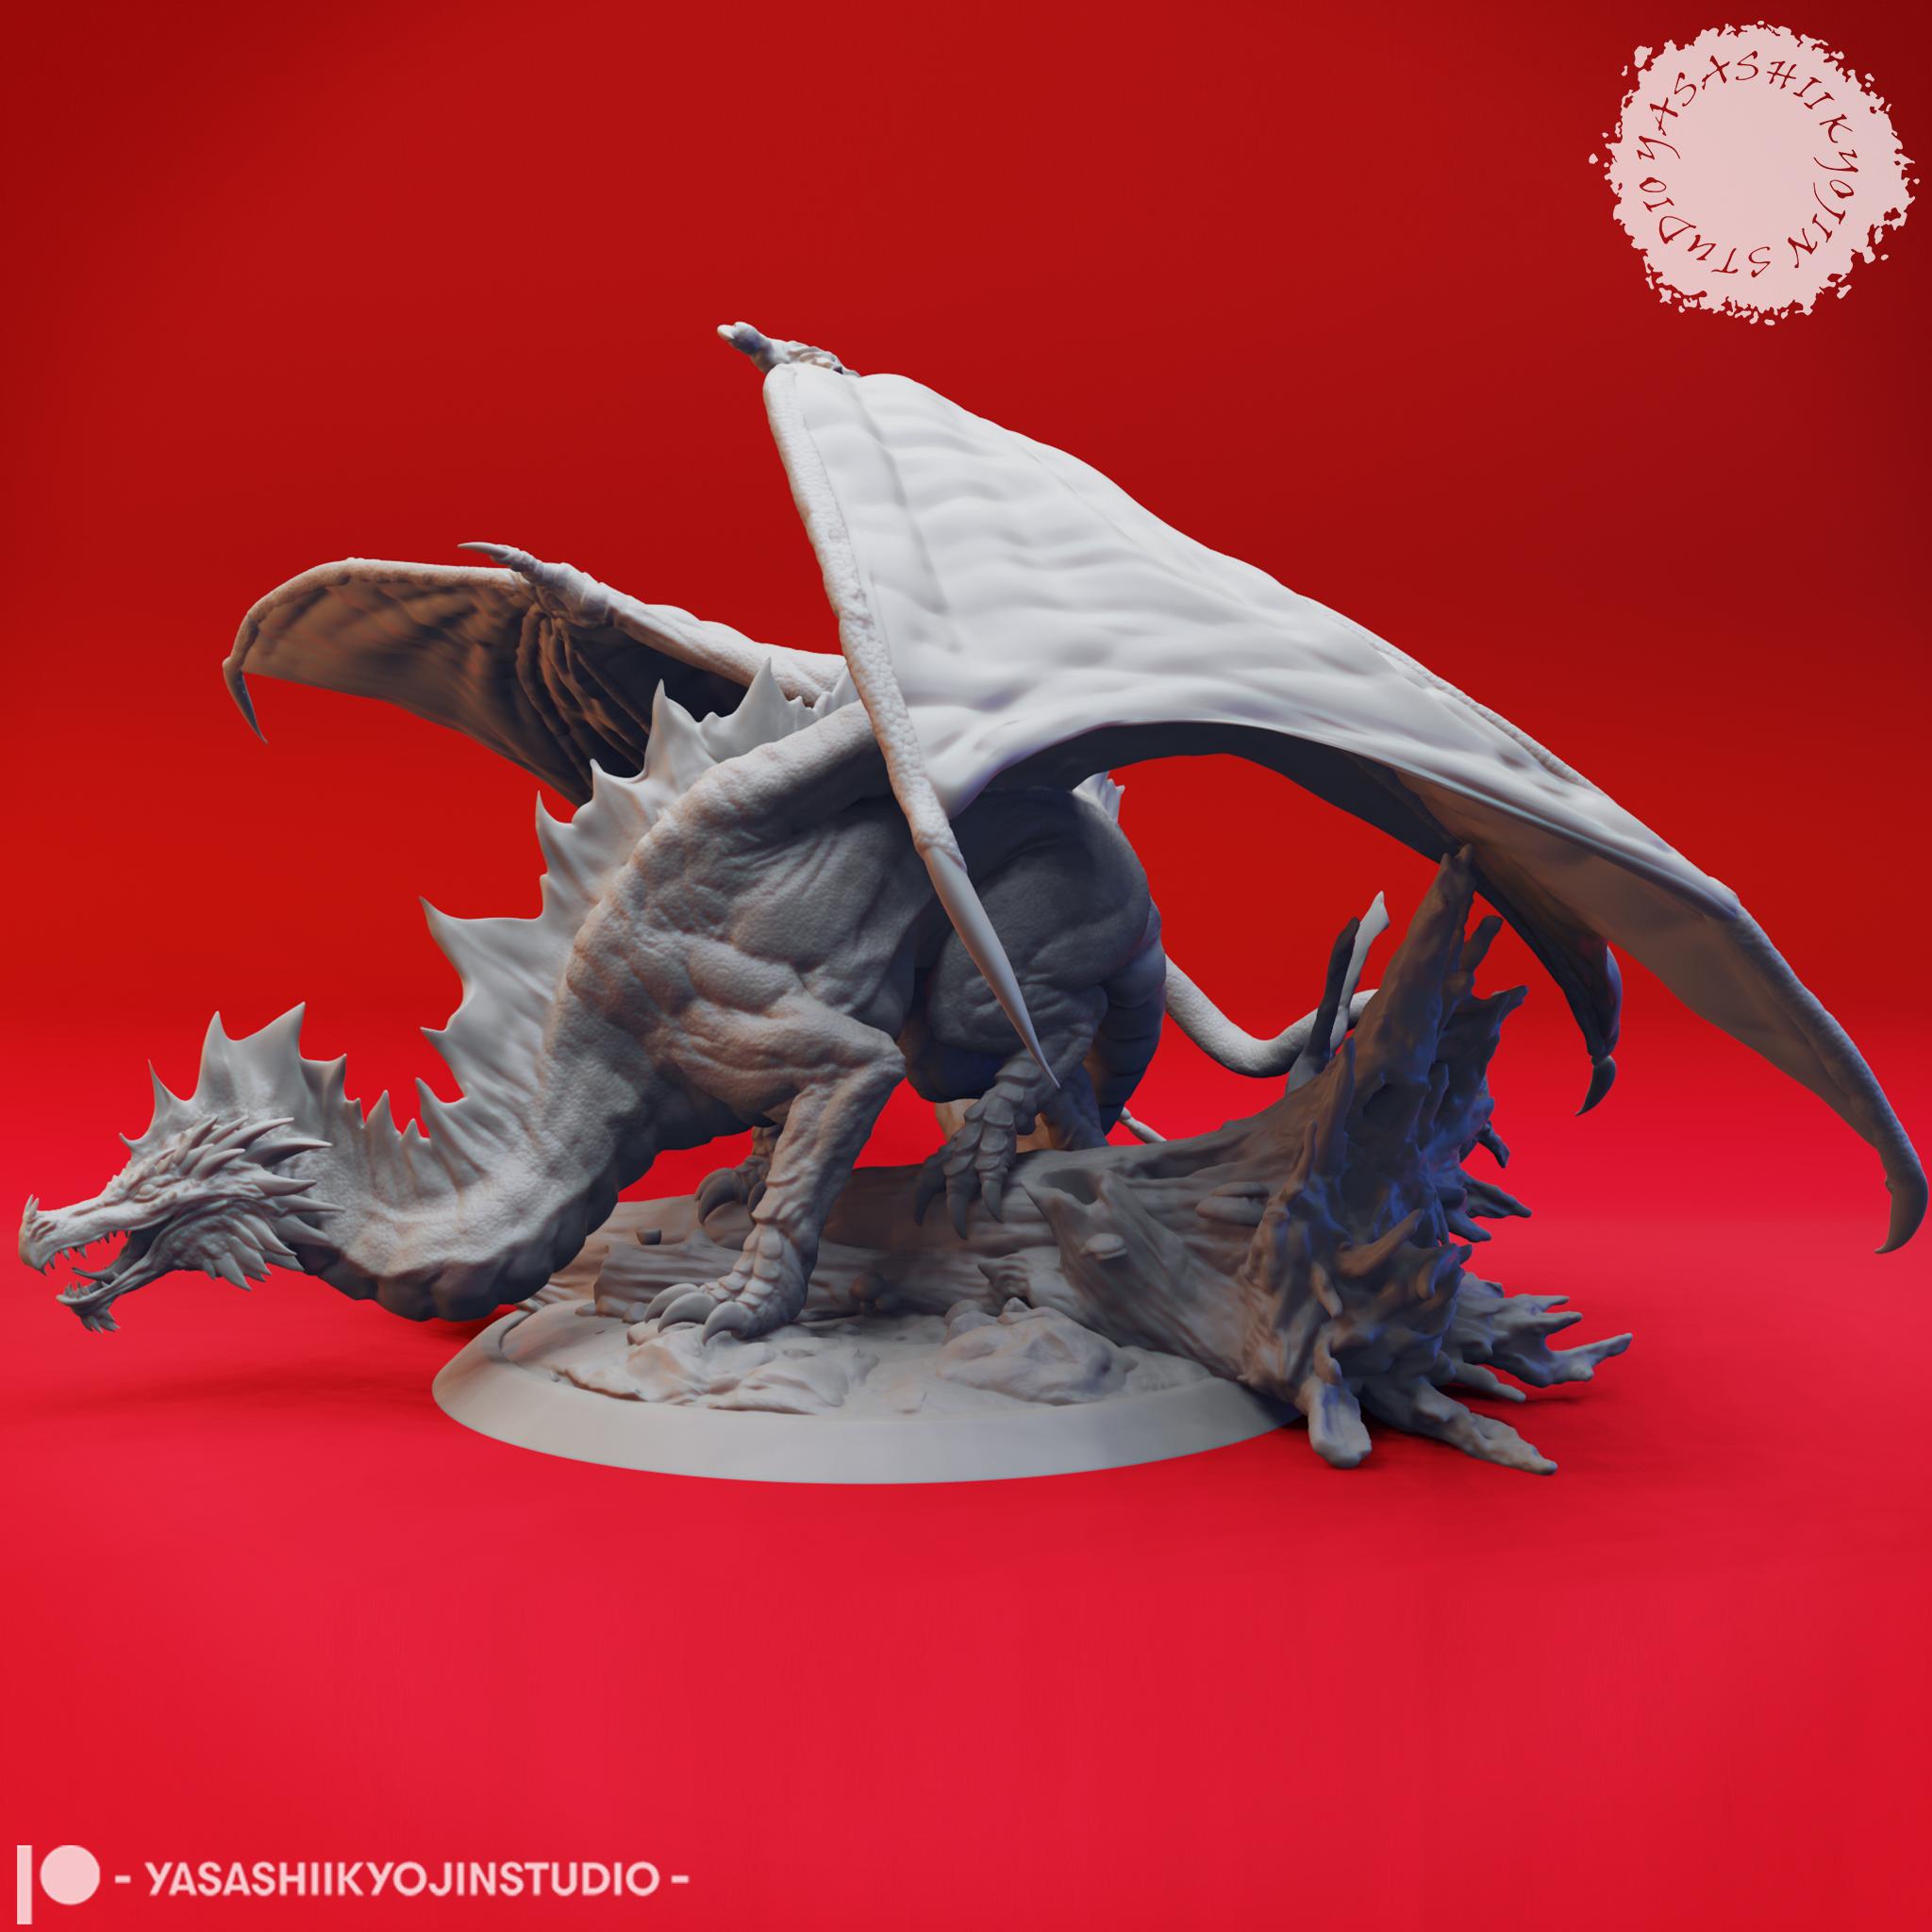 Adult Green Dragon - Tabletop Miniature (Pre-Supported) 3d model